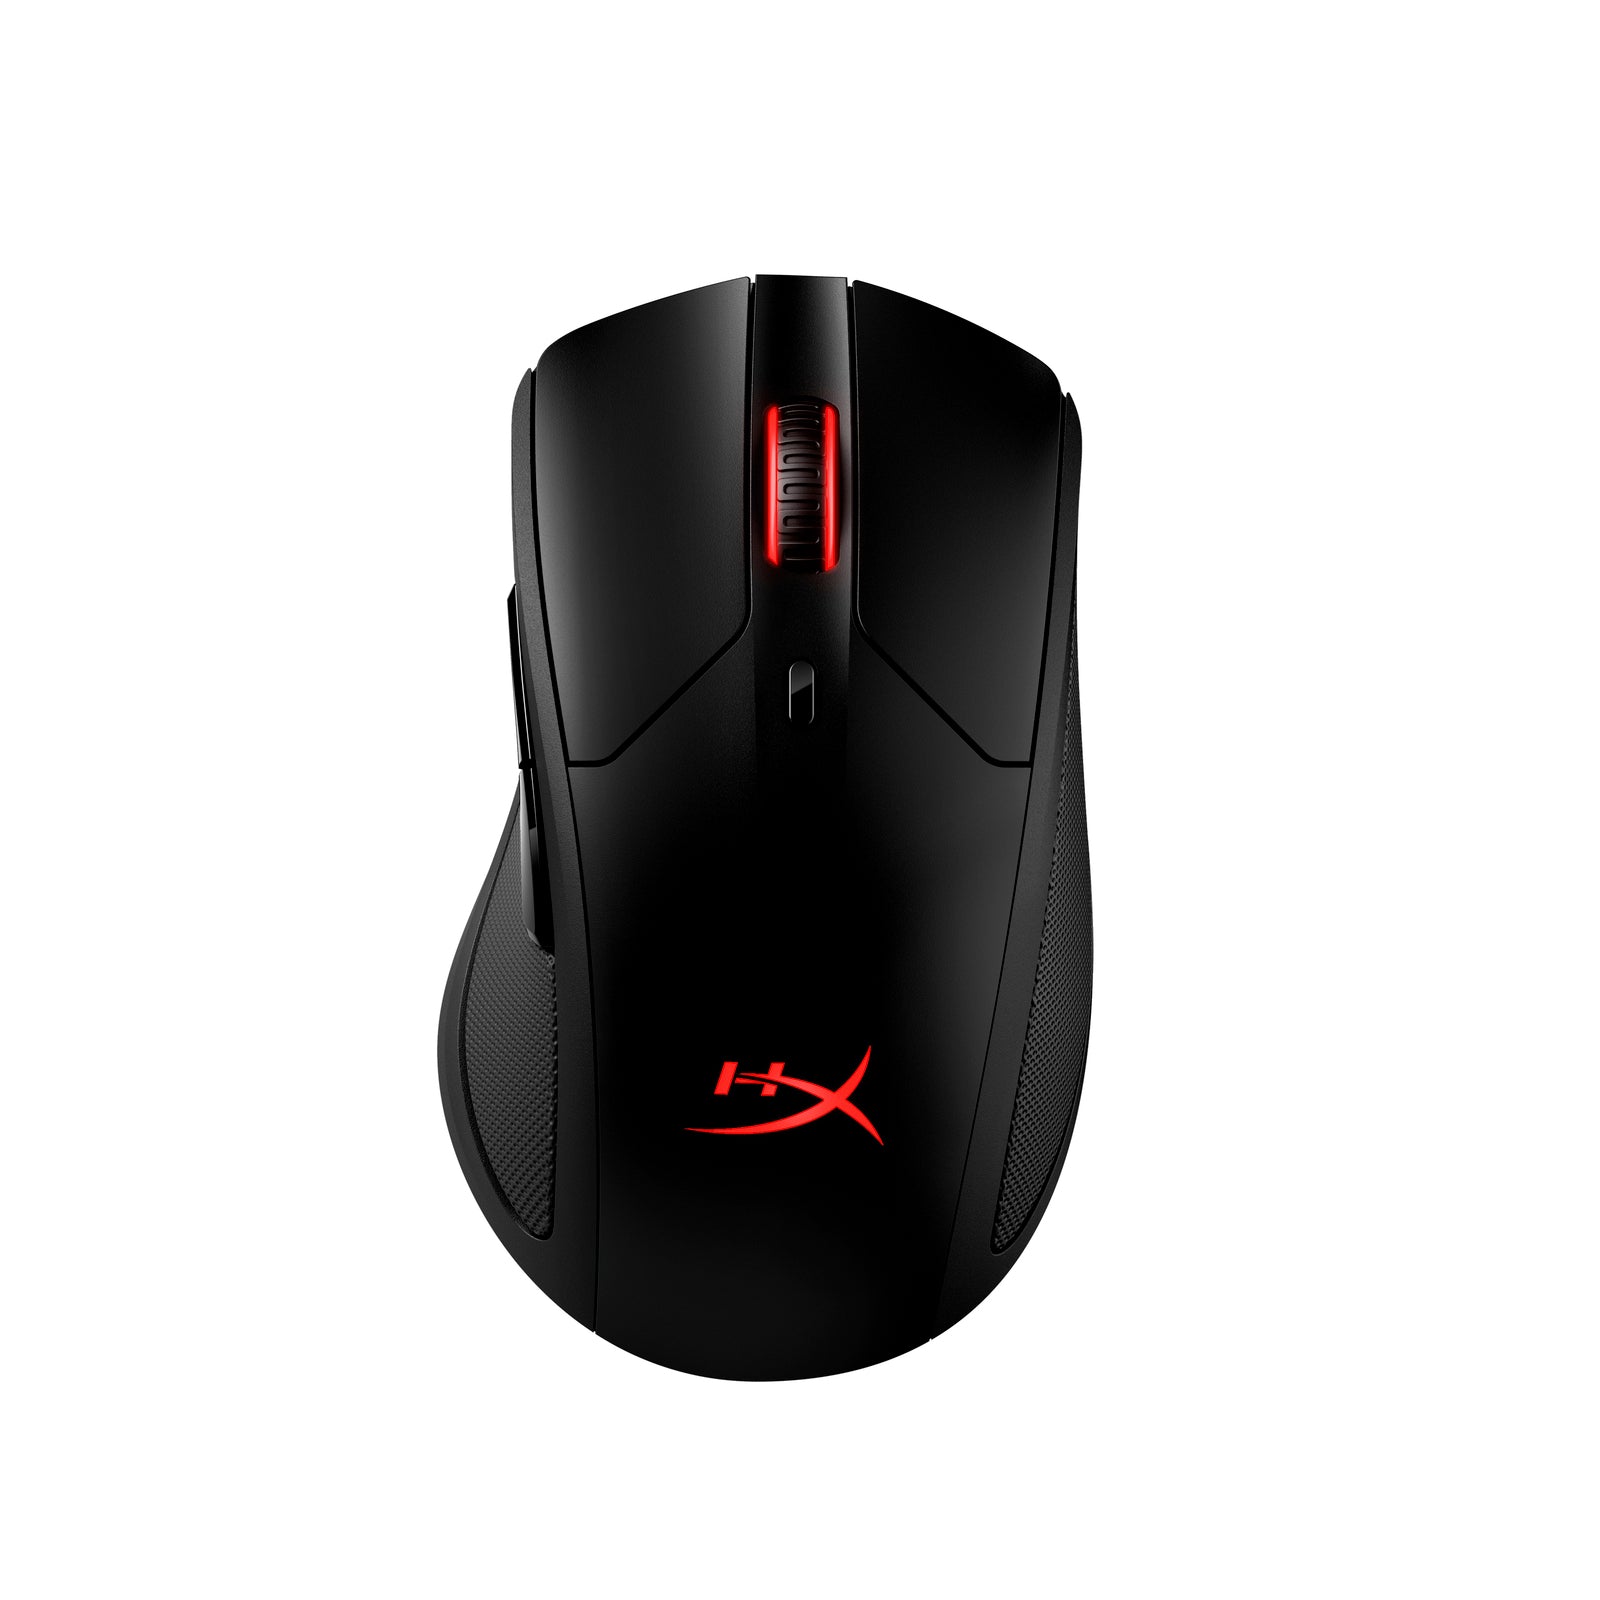 Pulsefire Dart - Wireless Gaming Mouse